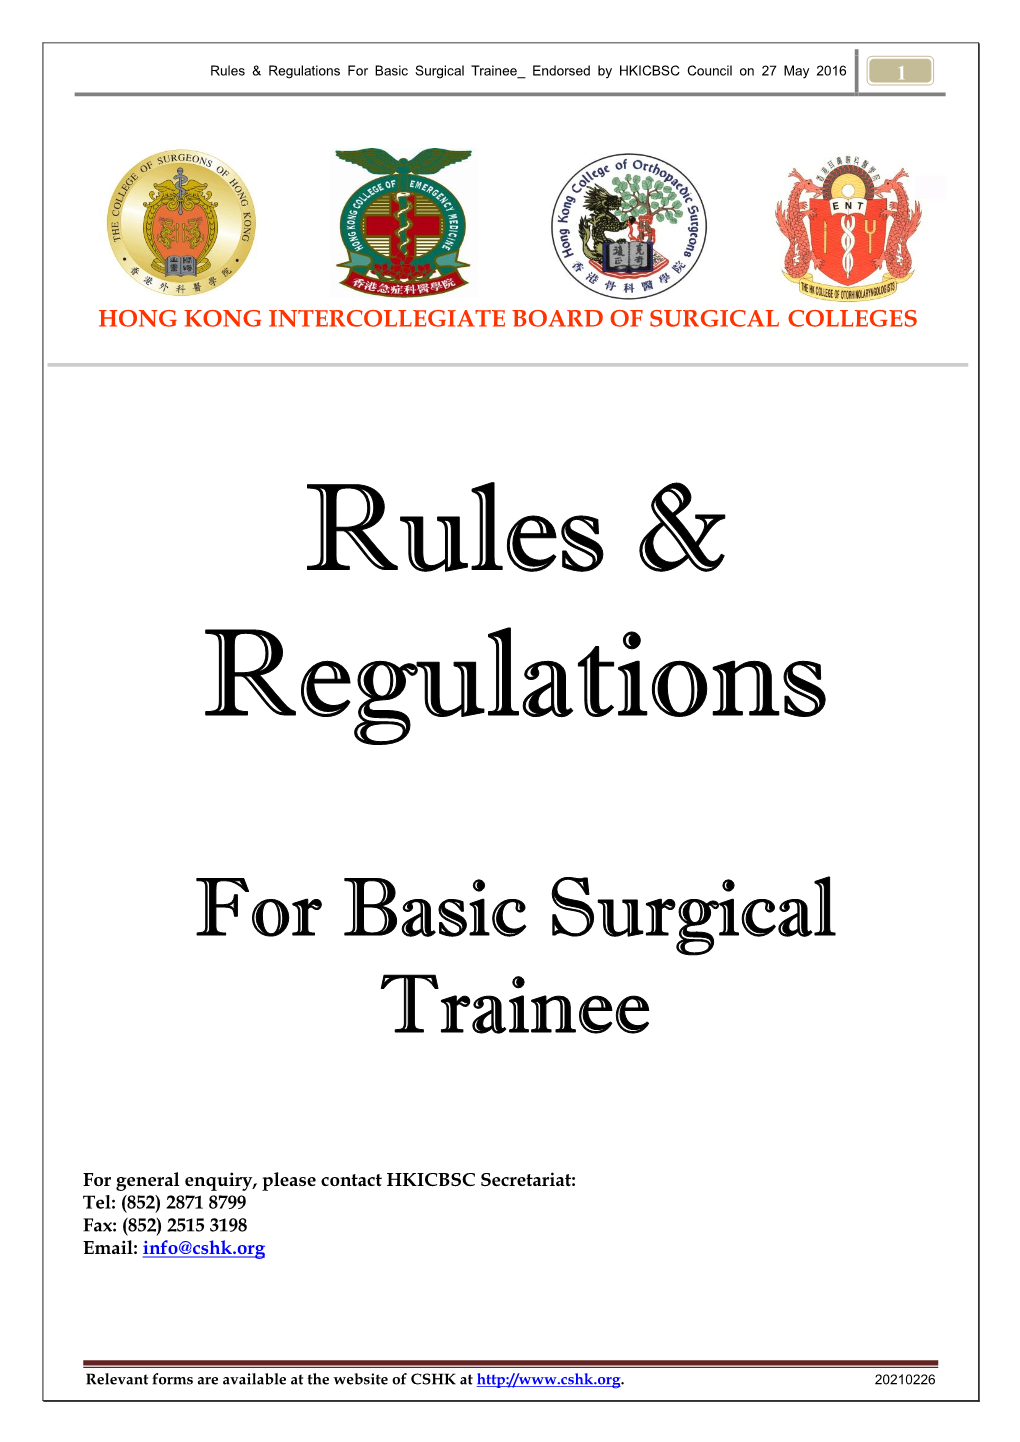 For Basic Surgical Trainee Endorsed by HKICBSC Council on 27 May 2016 1